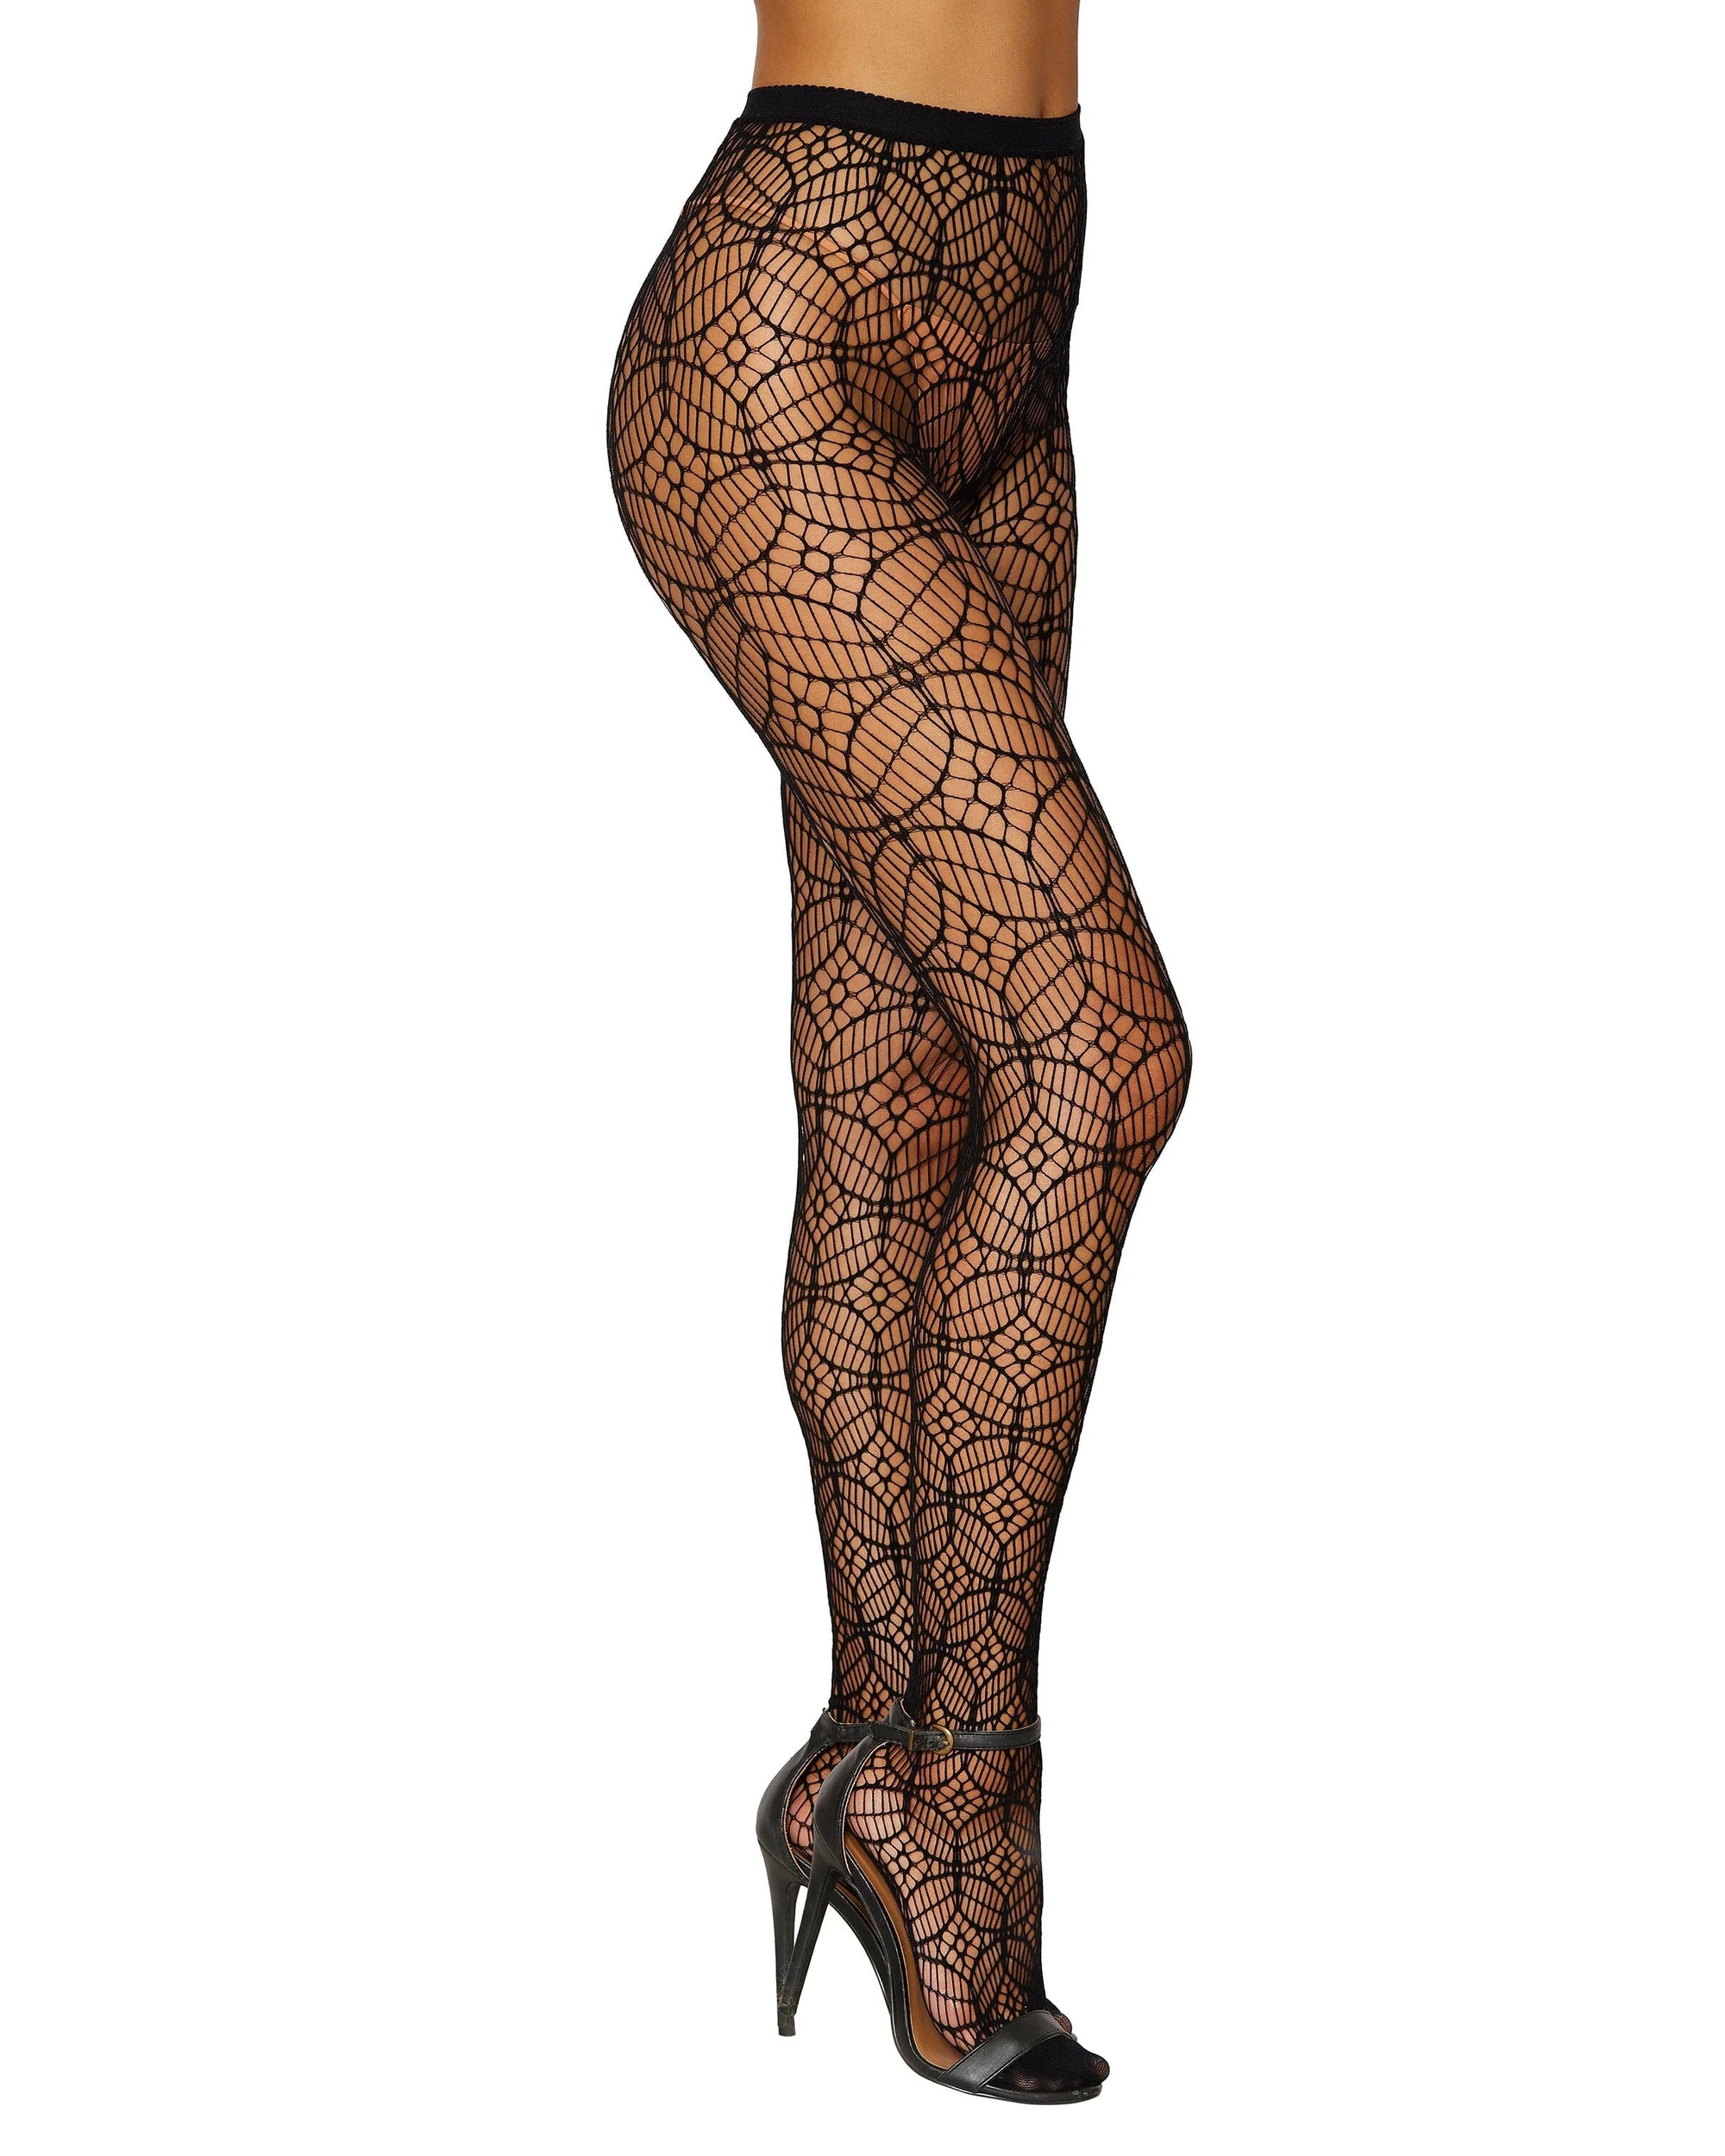 Dreamgirl Abstract Knitted Fishnet Pantyhose Black One Size